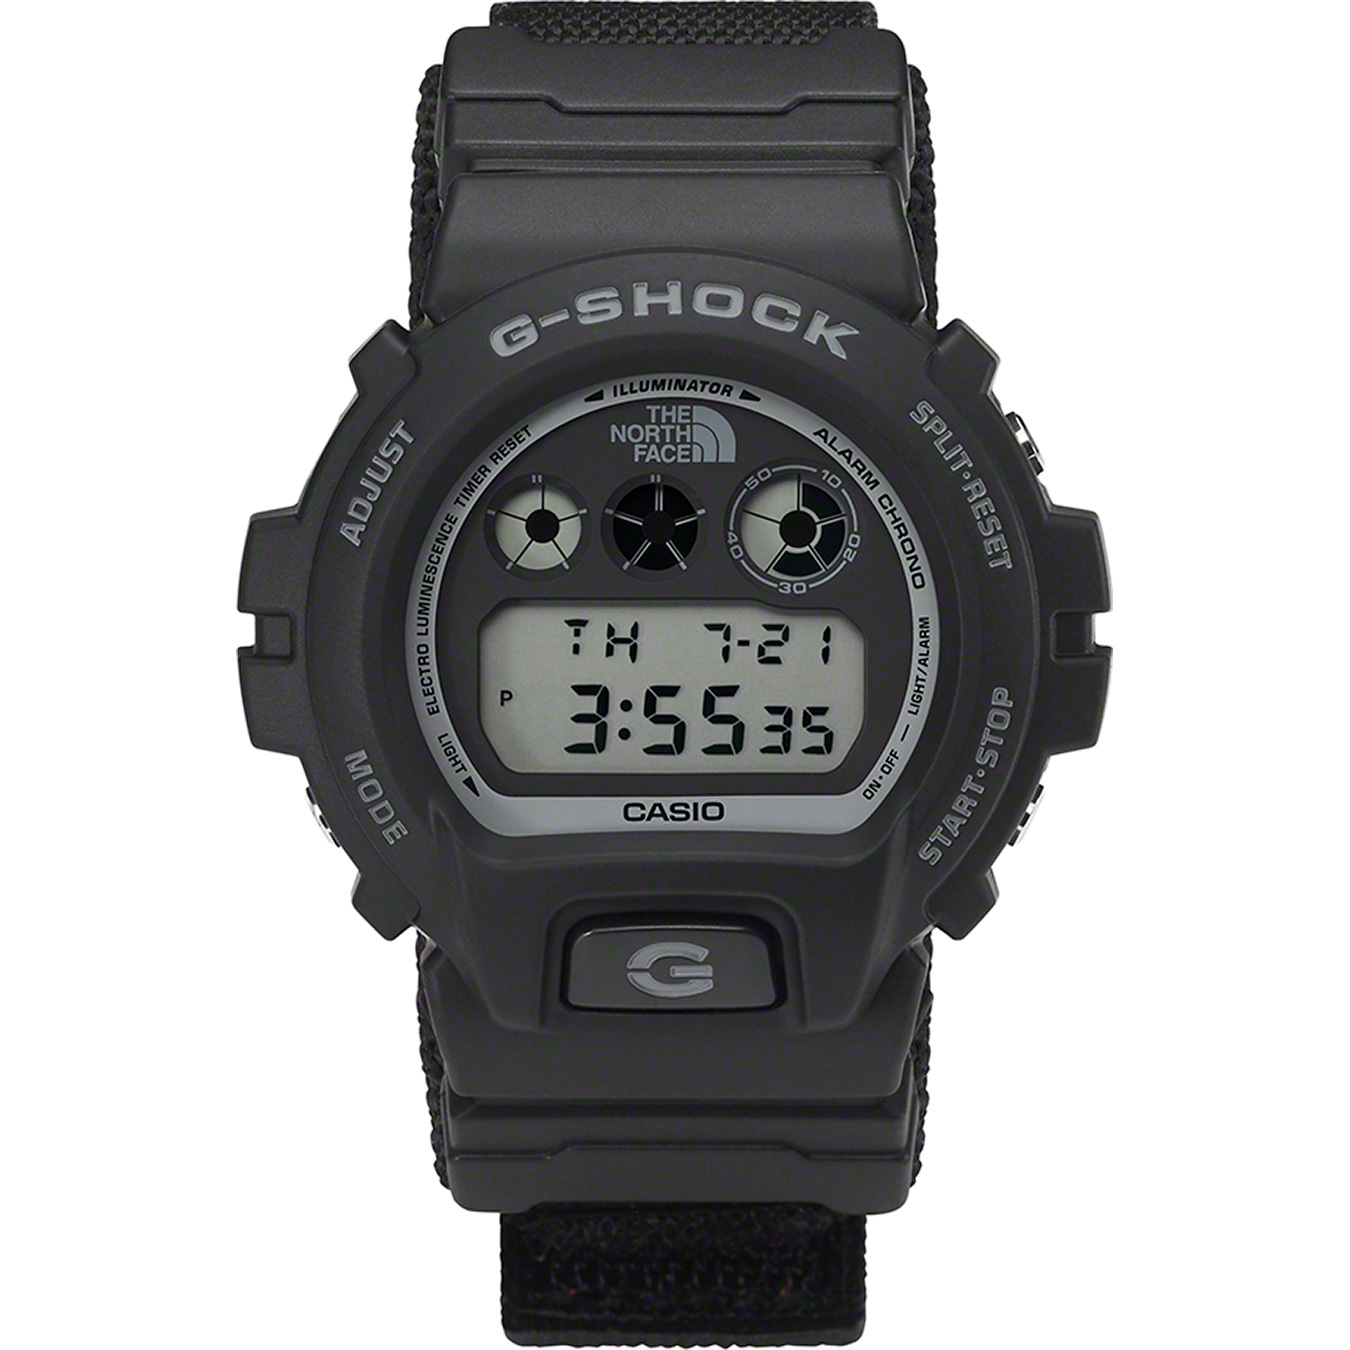 Sup The North Face G-SHOCK Watch "Black"